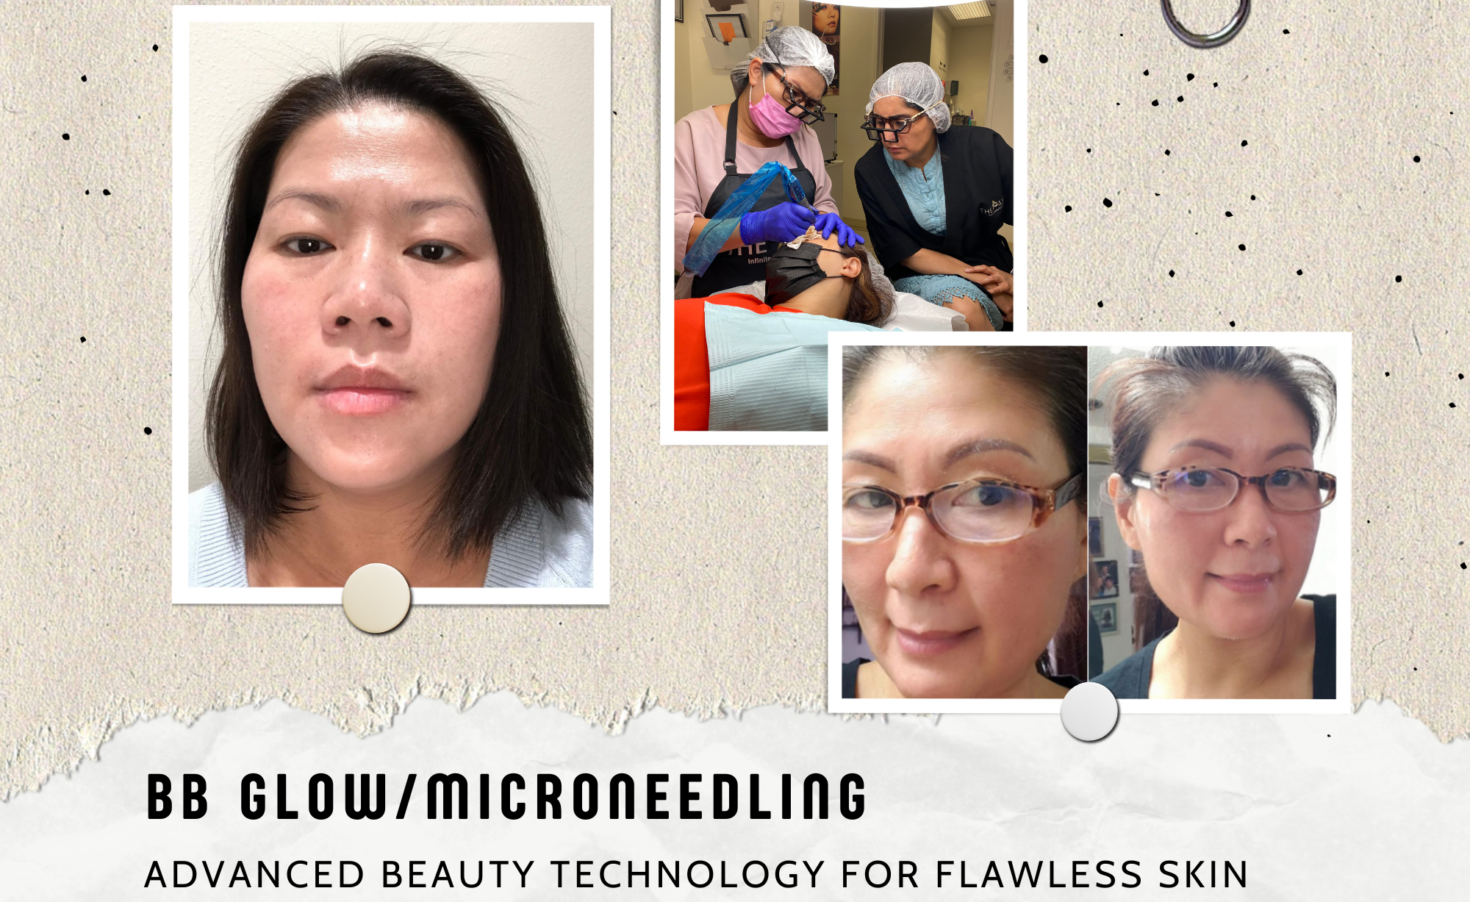 Discover BB Glow/Microneedling - a breakthrough beauty treatment that improves your skin naturally and permanently. BB Glow/Microneedling is a semi-permanent makeup procedure that helps conceal dark spots and naturally even skin tone, stimulate skin regeneration, and reduce crow's feet and wrinkles.